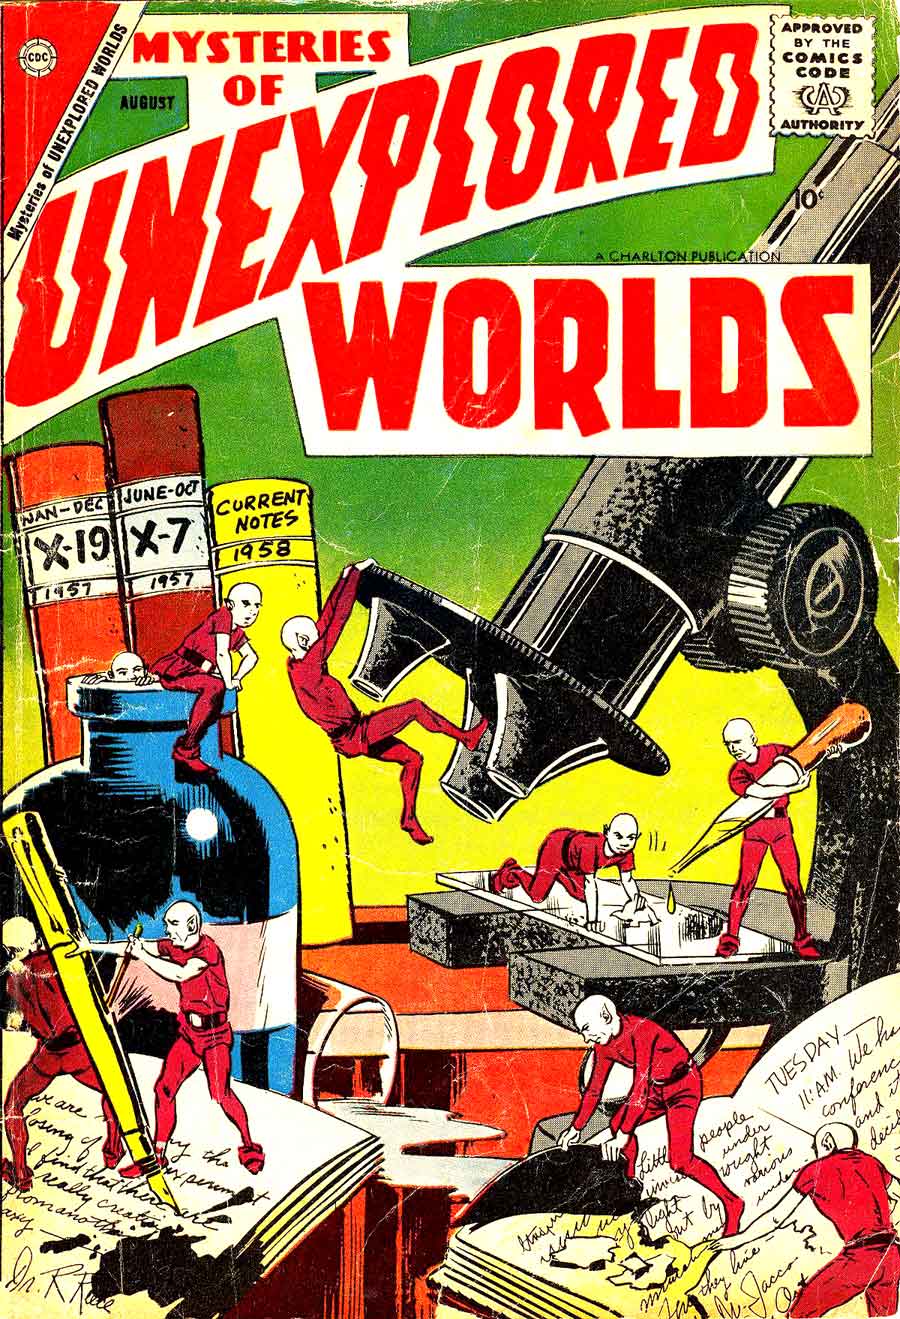 Mysteries of Unexplored Worlds #9 cover